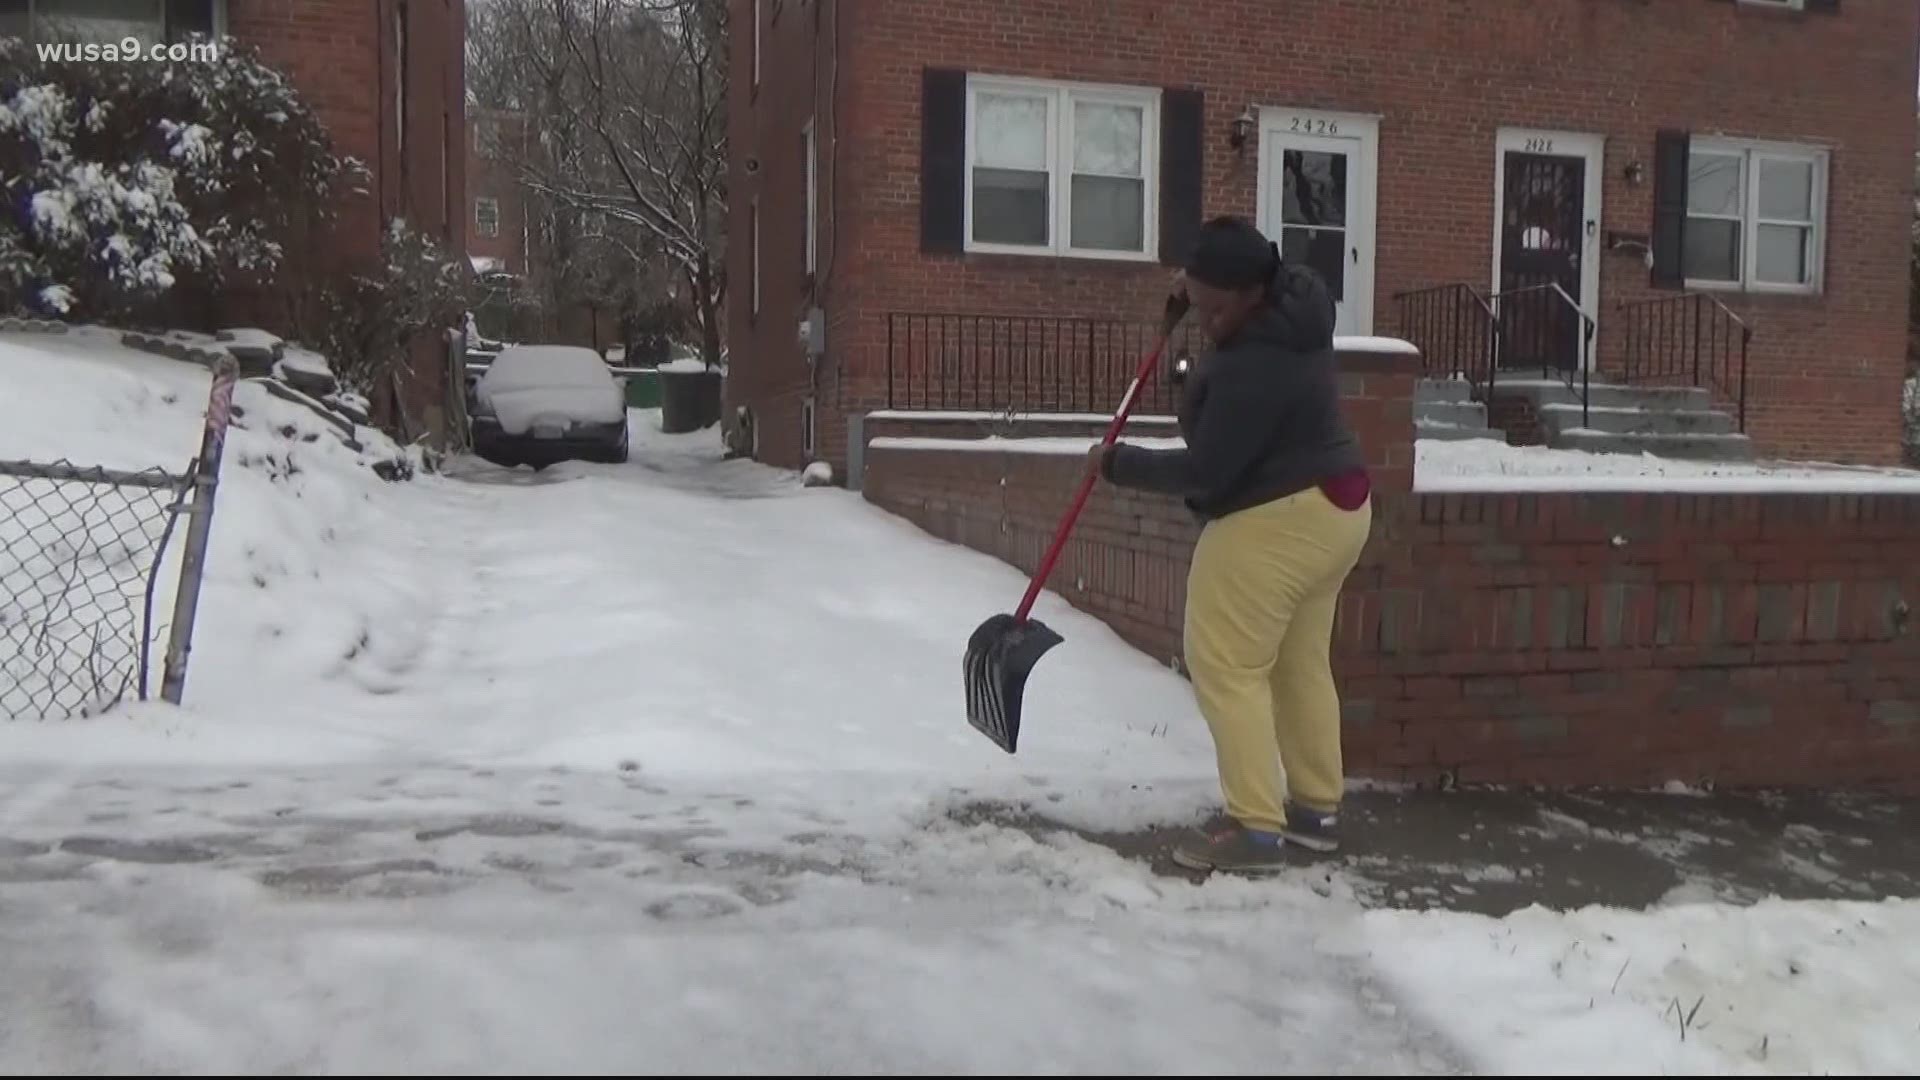 Residents throughout DC work to remove the snow and ice before the second round of winter weather.